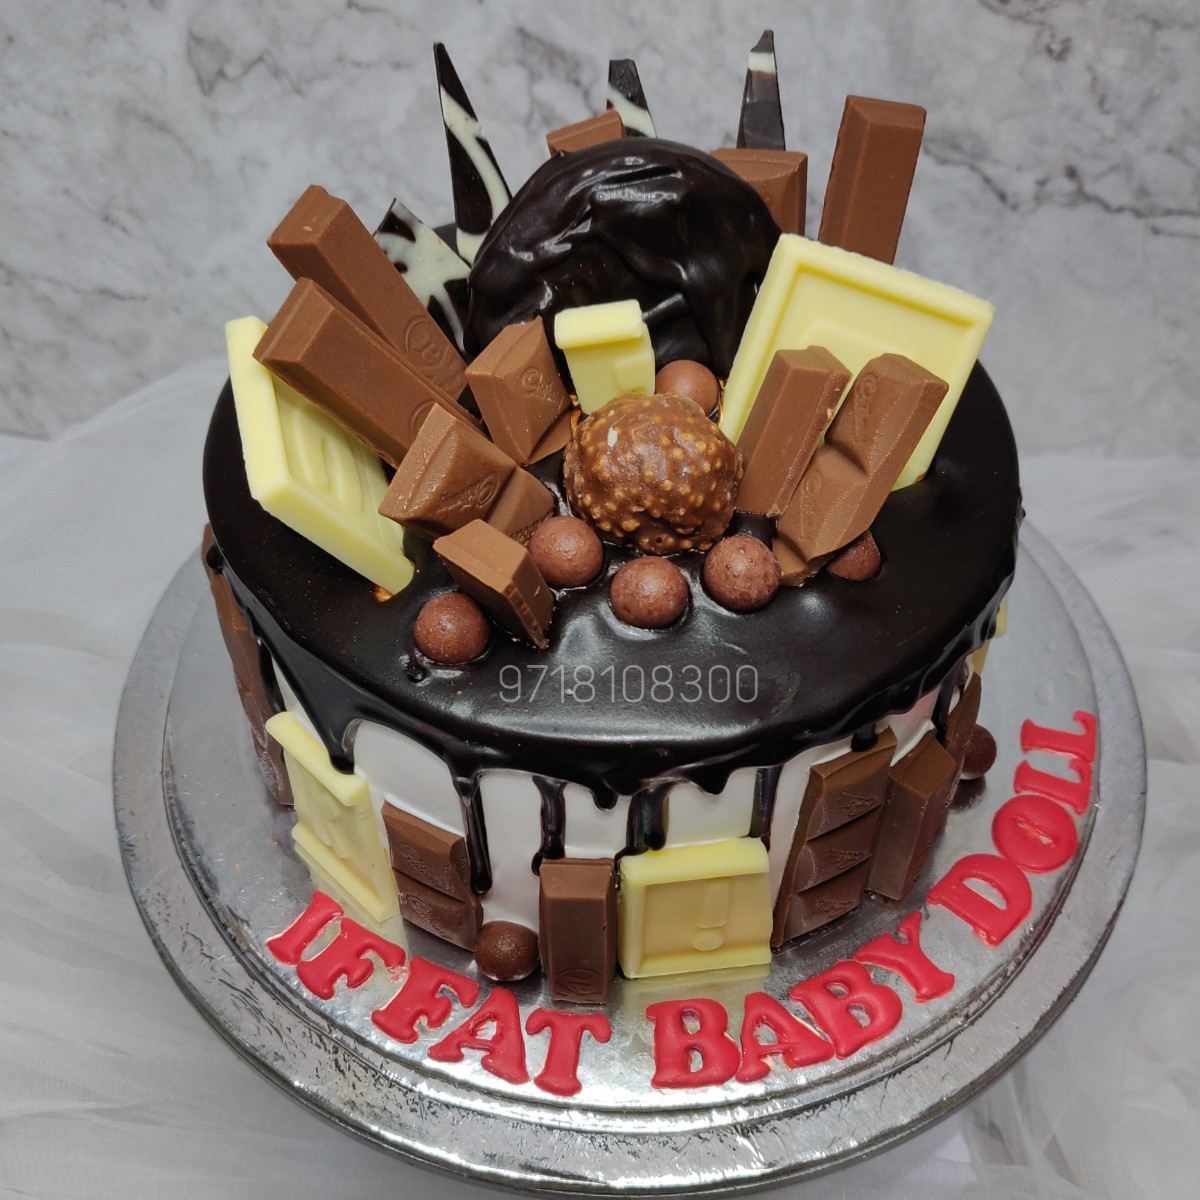 Royal Truffle Cake - Buy, Send & Order Online Delivery In India - Cake2homes